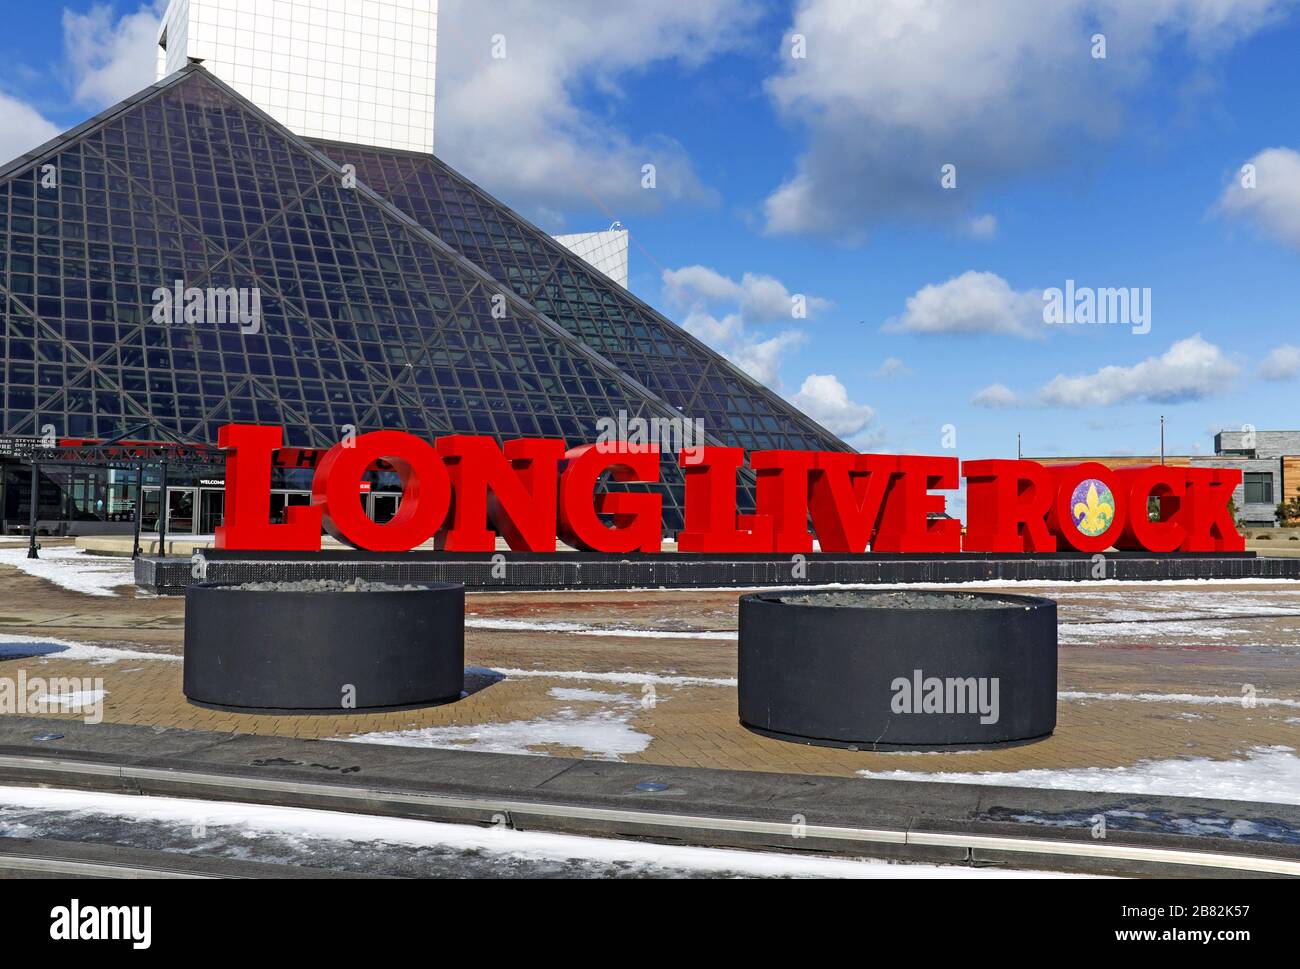 The Rock and Roll Hall of Fame and Museum in Cleveland, Ohio, USA with its 'Long Live Rock' display on the plaza during the winter. Stock Photo